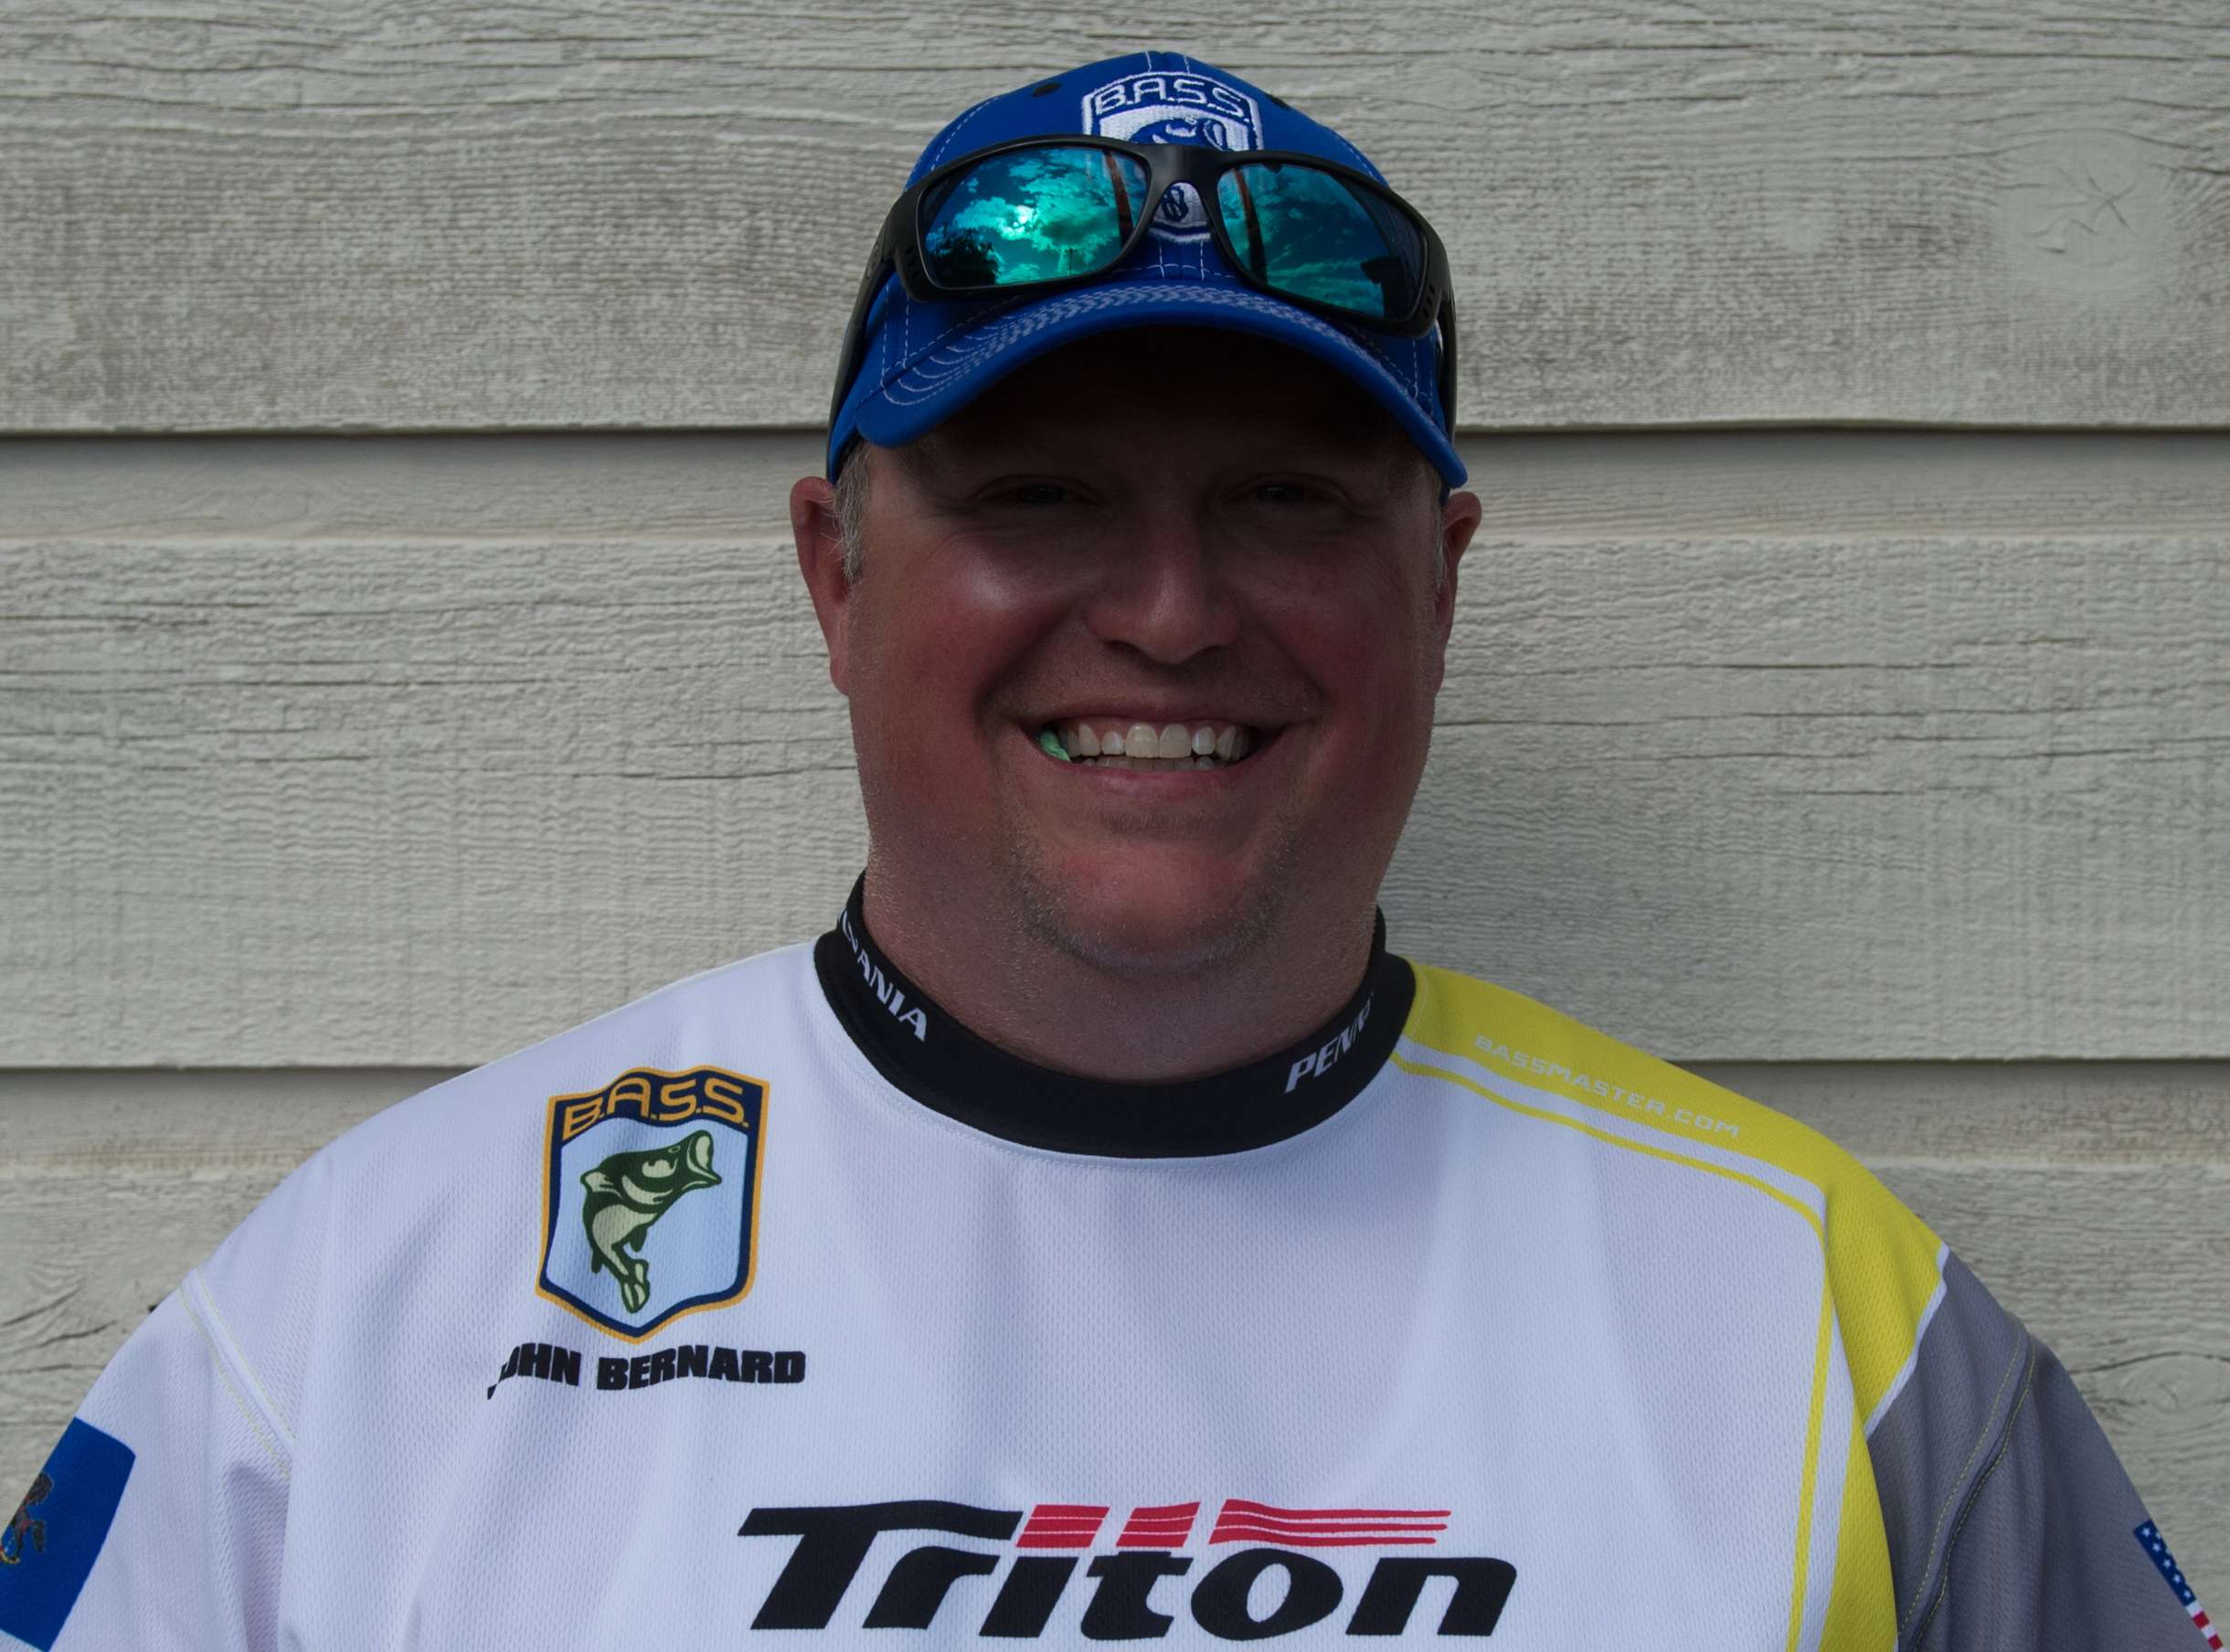 John Bernard <br>
Pennsylvania Nonboater <br>
John Bernard works as a client service officer. He likes spending time with friends and family, as well as cooking and sports. Heâs a member of the Mariner Bassmasters, and this will be his first championship. His sponsors are the Pennsylvania B.A.S.S. Nation and Hedgehog Custom Tackle.